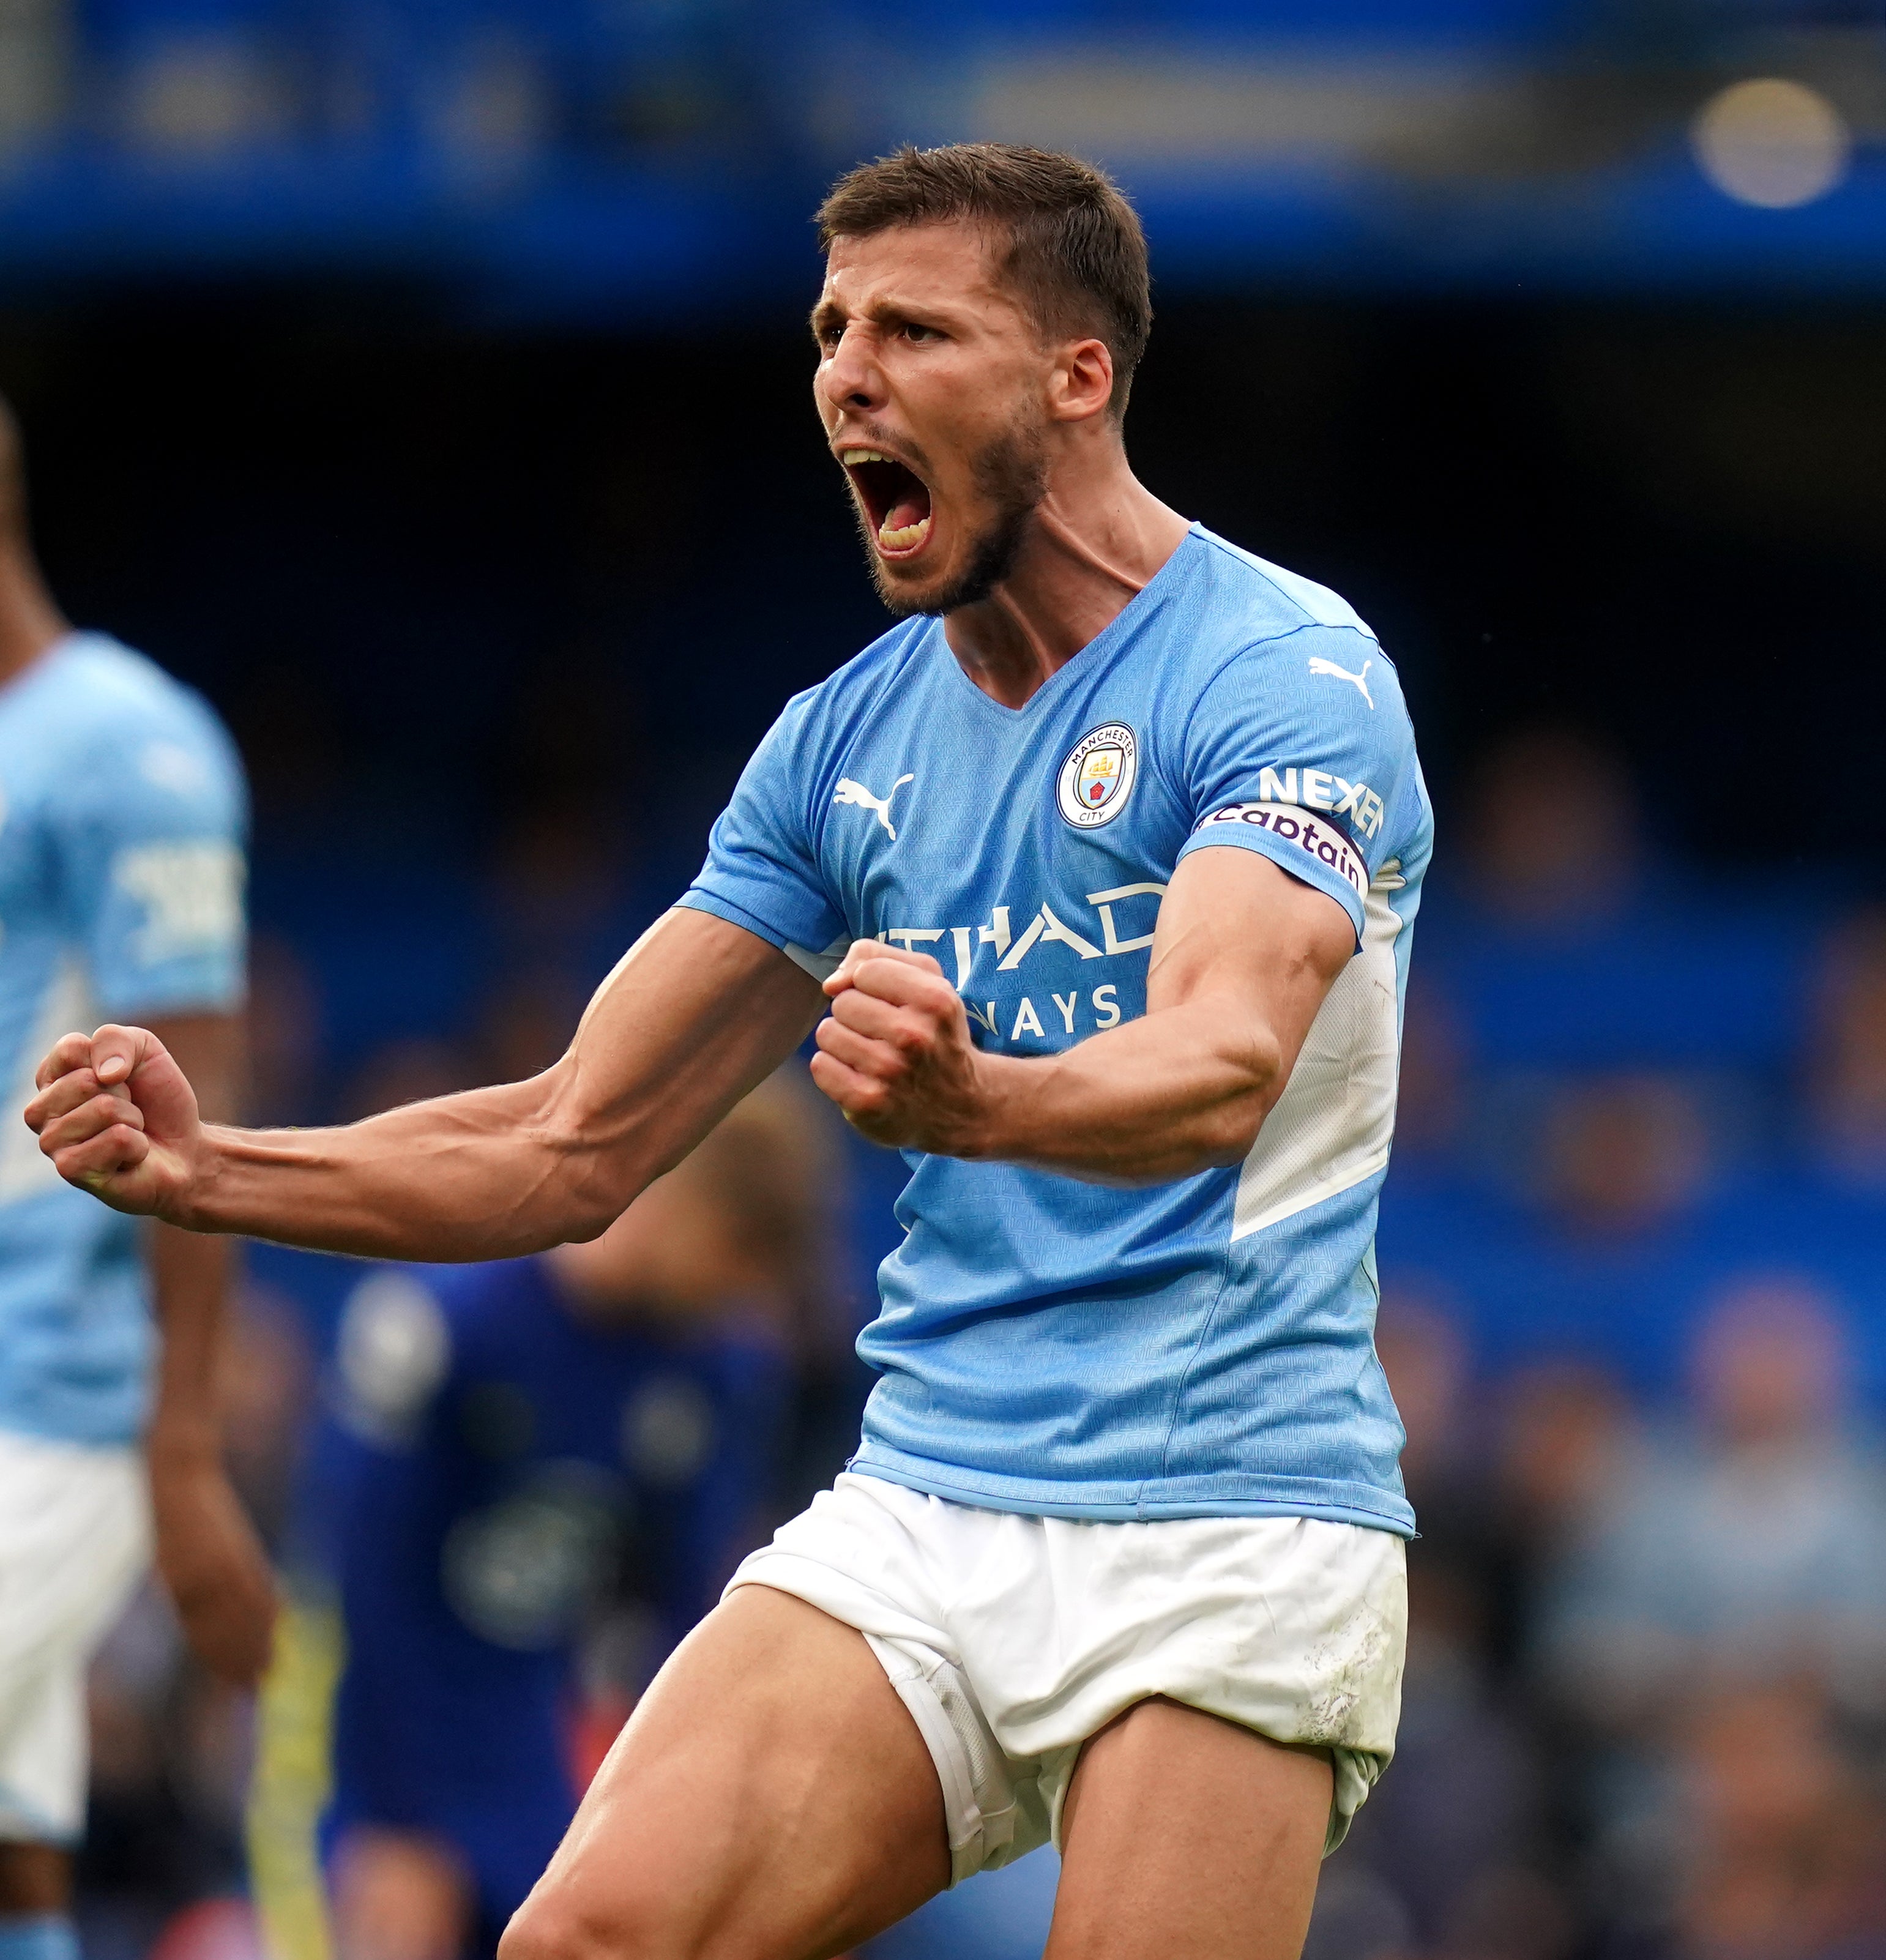 Manchester City’s Ruben Dias shows his delight at the final whistle against Chelsea (Adam Davy/PA)